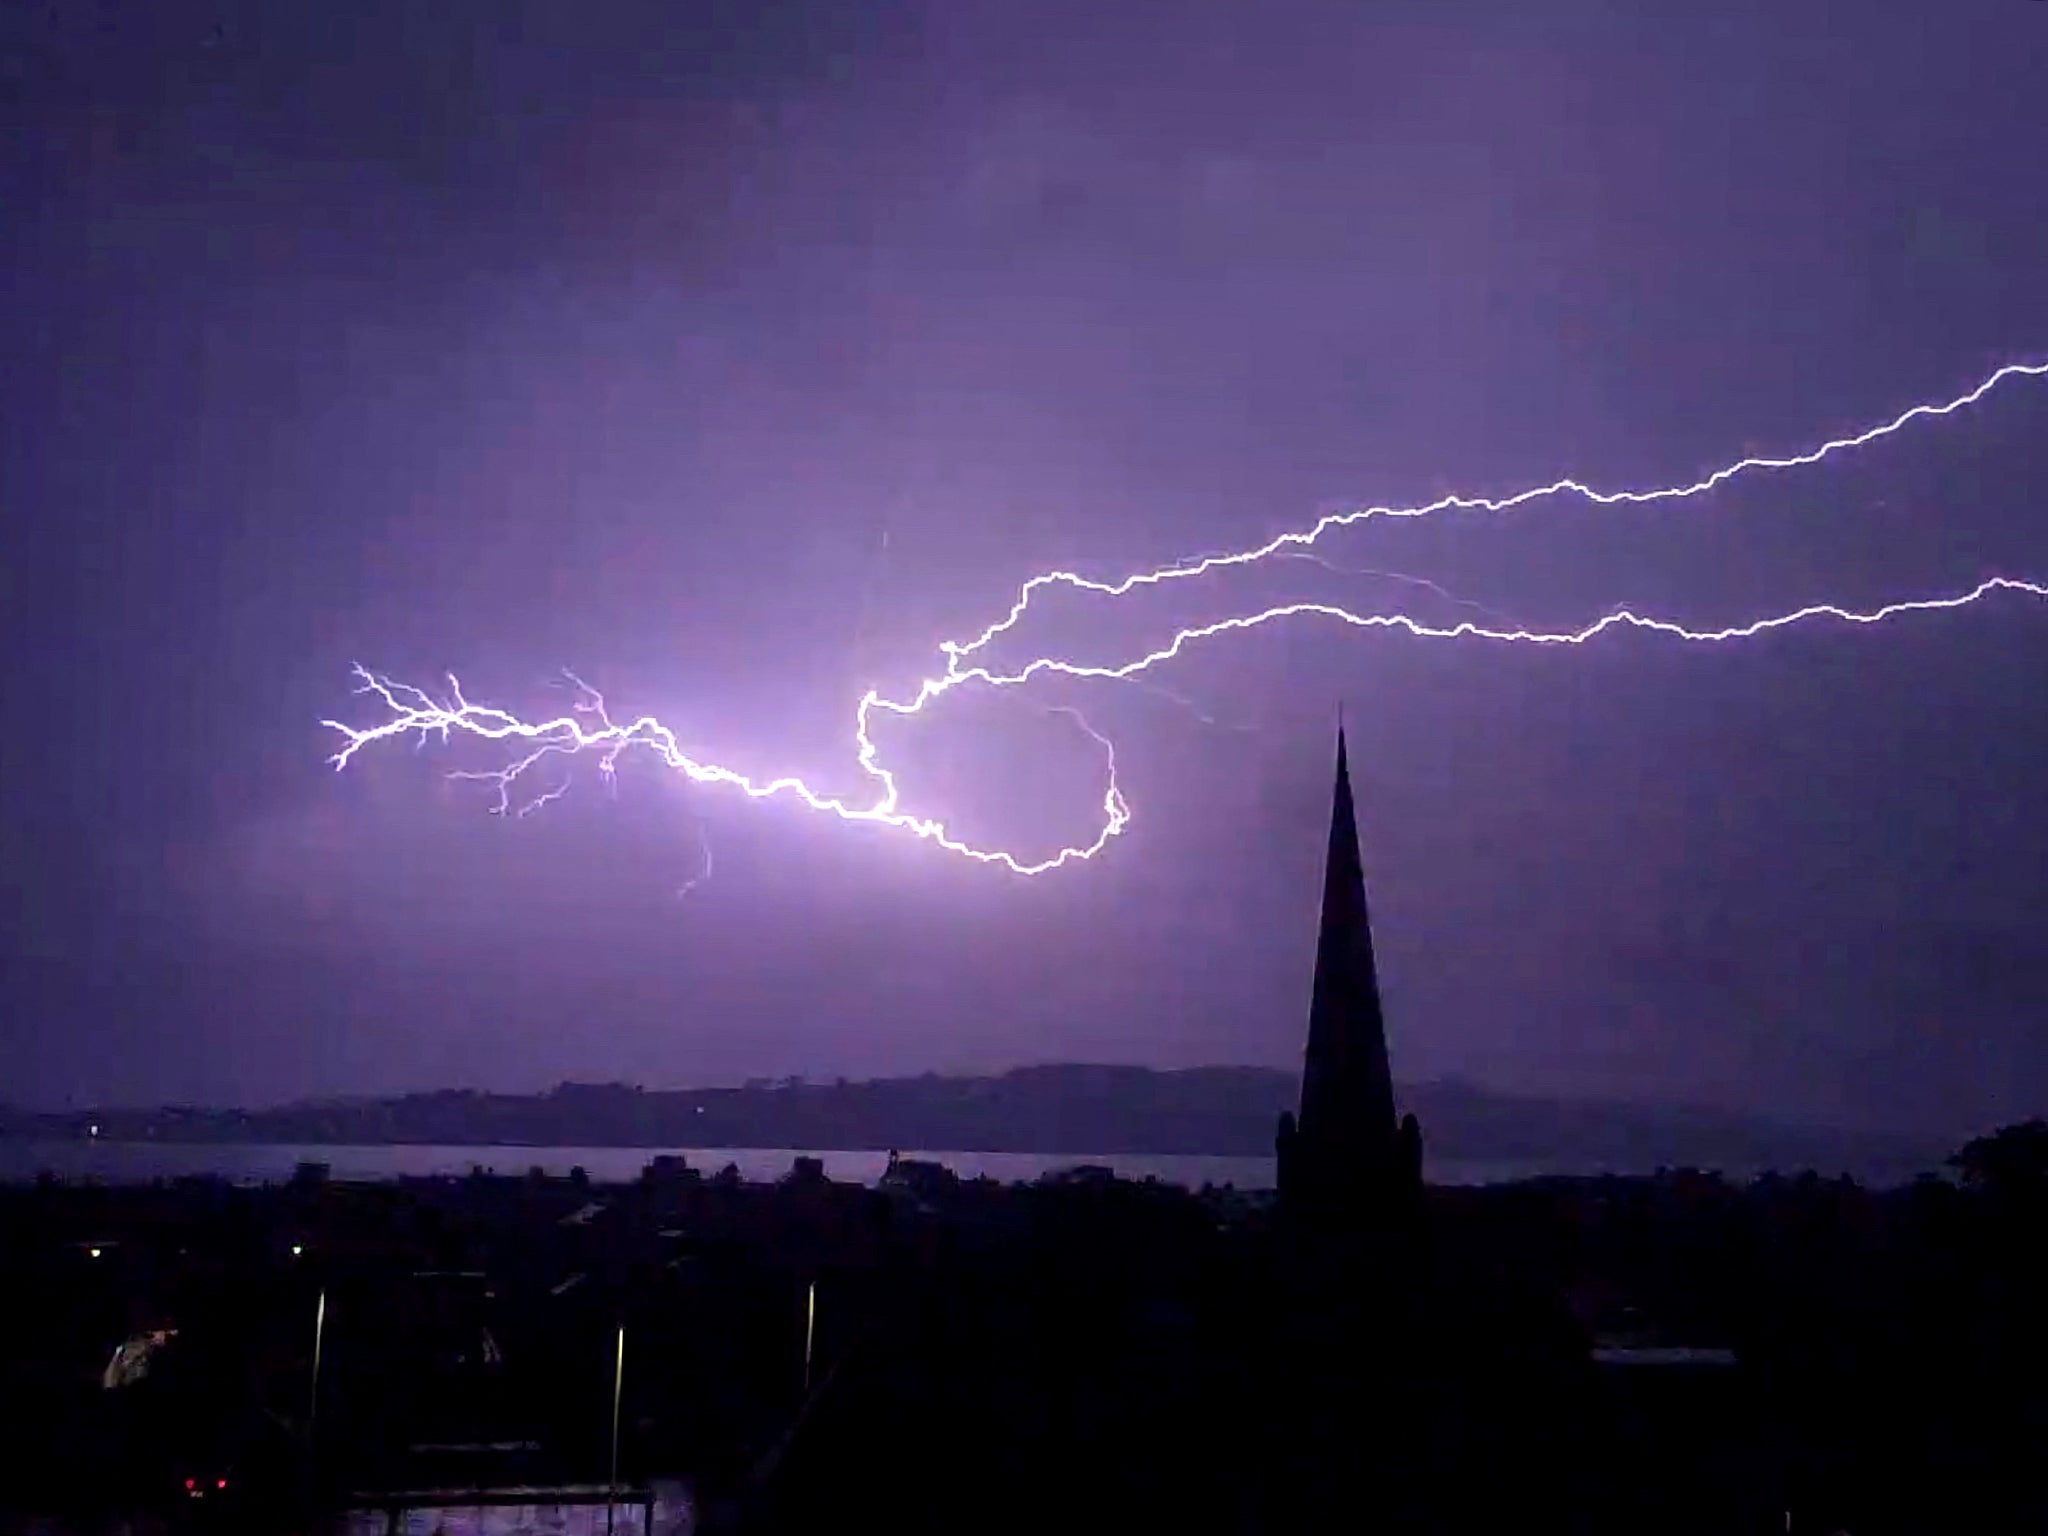 Thunderstorm warnings are in place across the UK this week